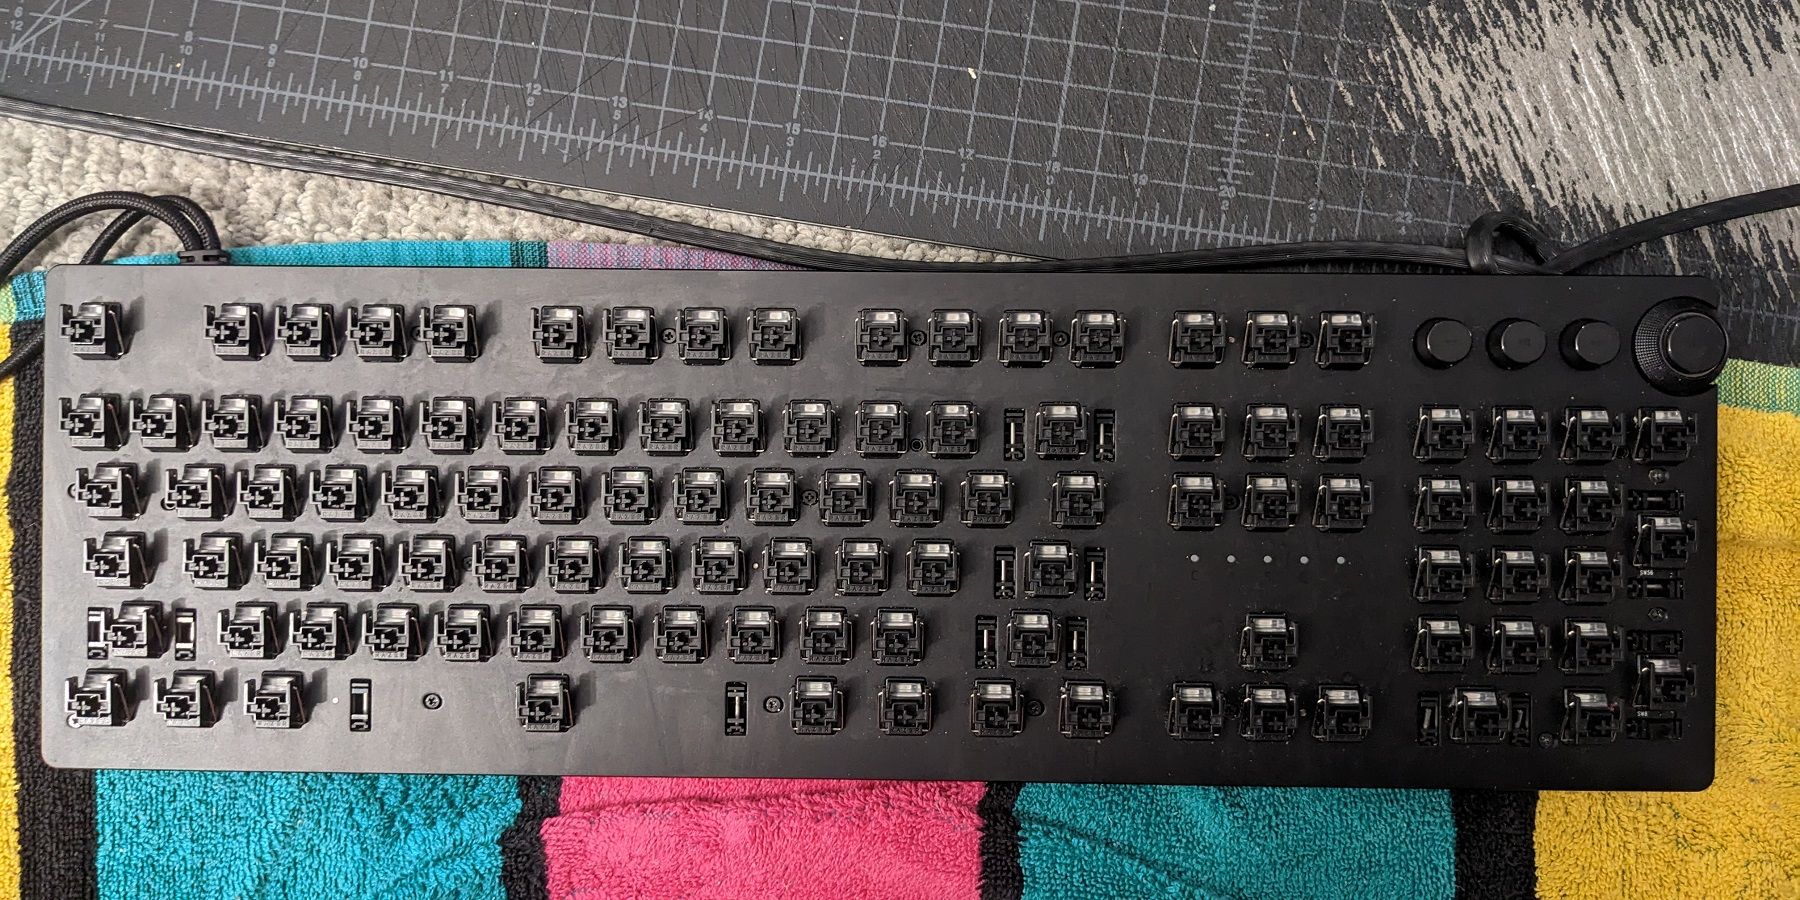 Razer Huntsman V2 Analog Keyboard Review - A Feather Touch